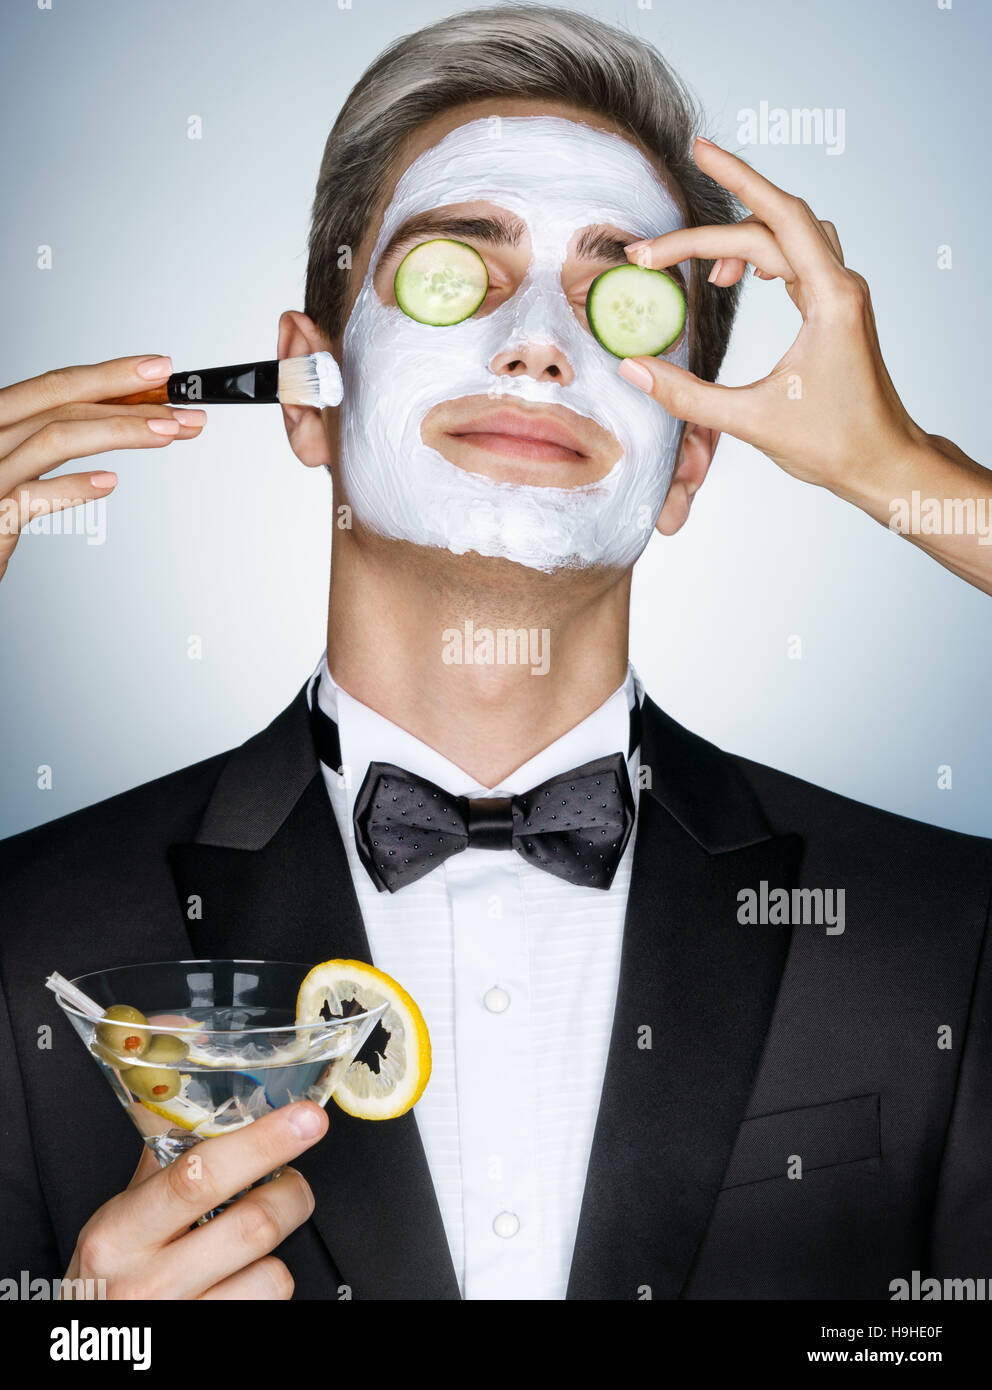 Gentleman receiving spa facial treatment. Photo of Handsome man with a facial mask on his face and cucumber on his eyes. Grooming himself Stock Photo